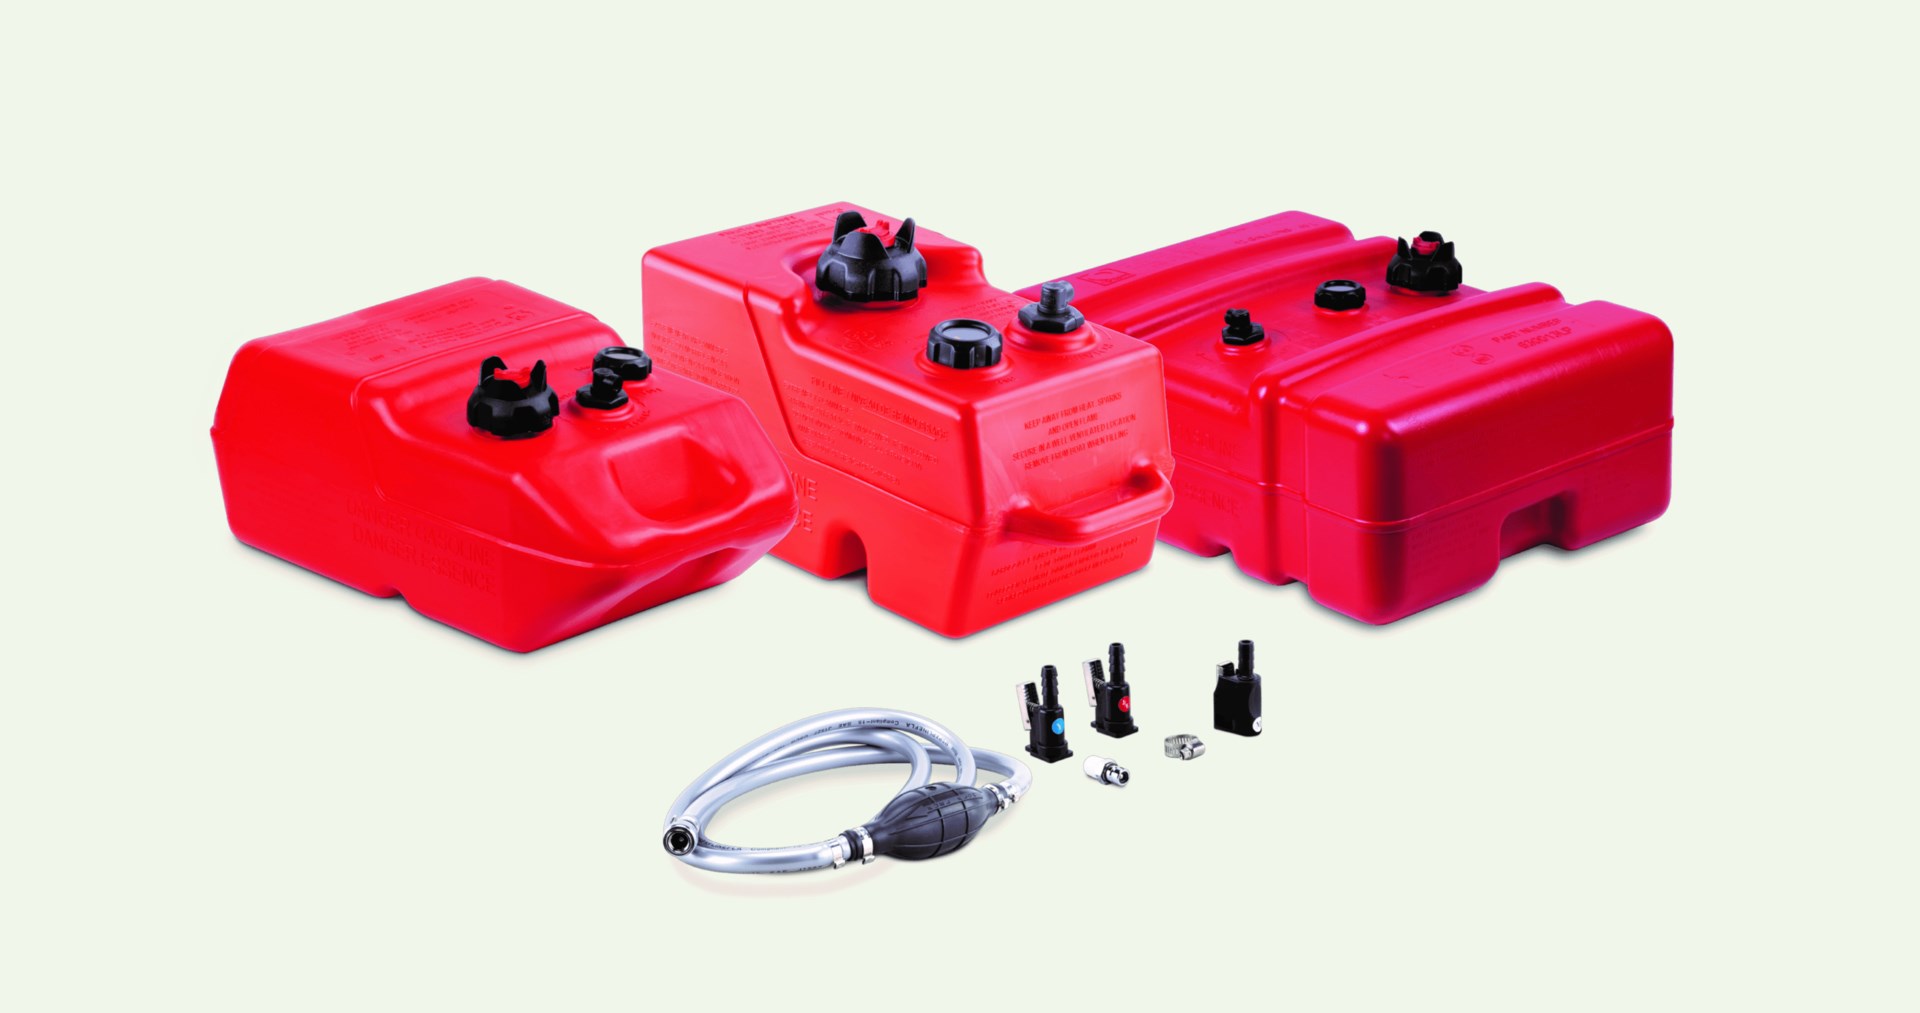 A collection of red Moeller and Sierra portable marine fuel tanks against a solid cream colored background